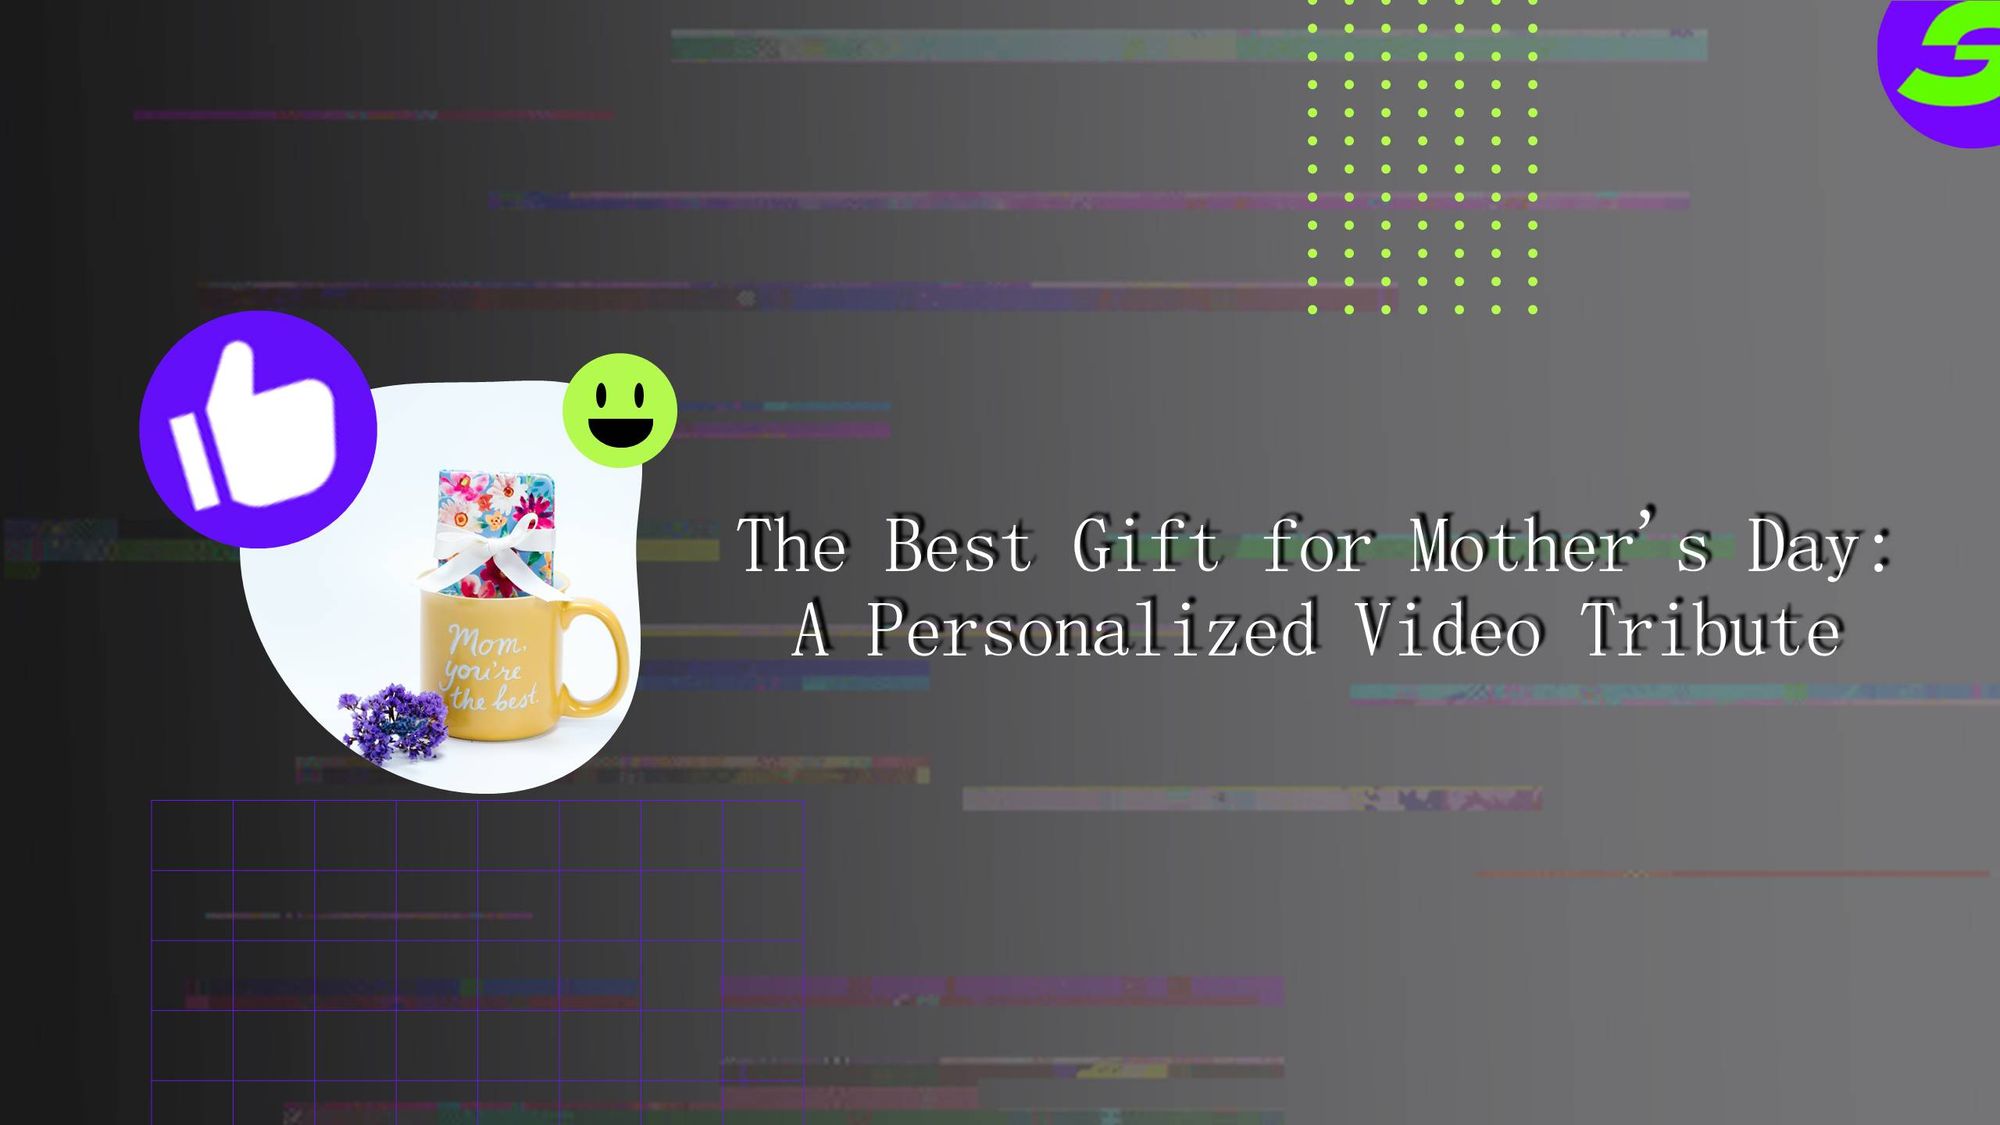 Make the best gift for Mother's Day with ShotCut Free video editor